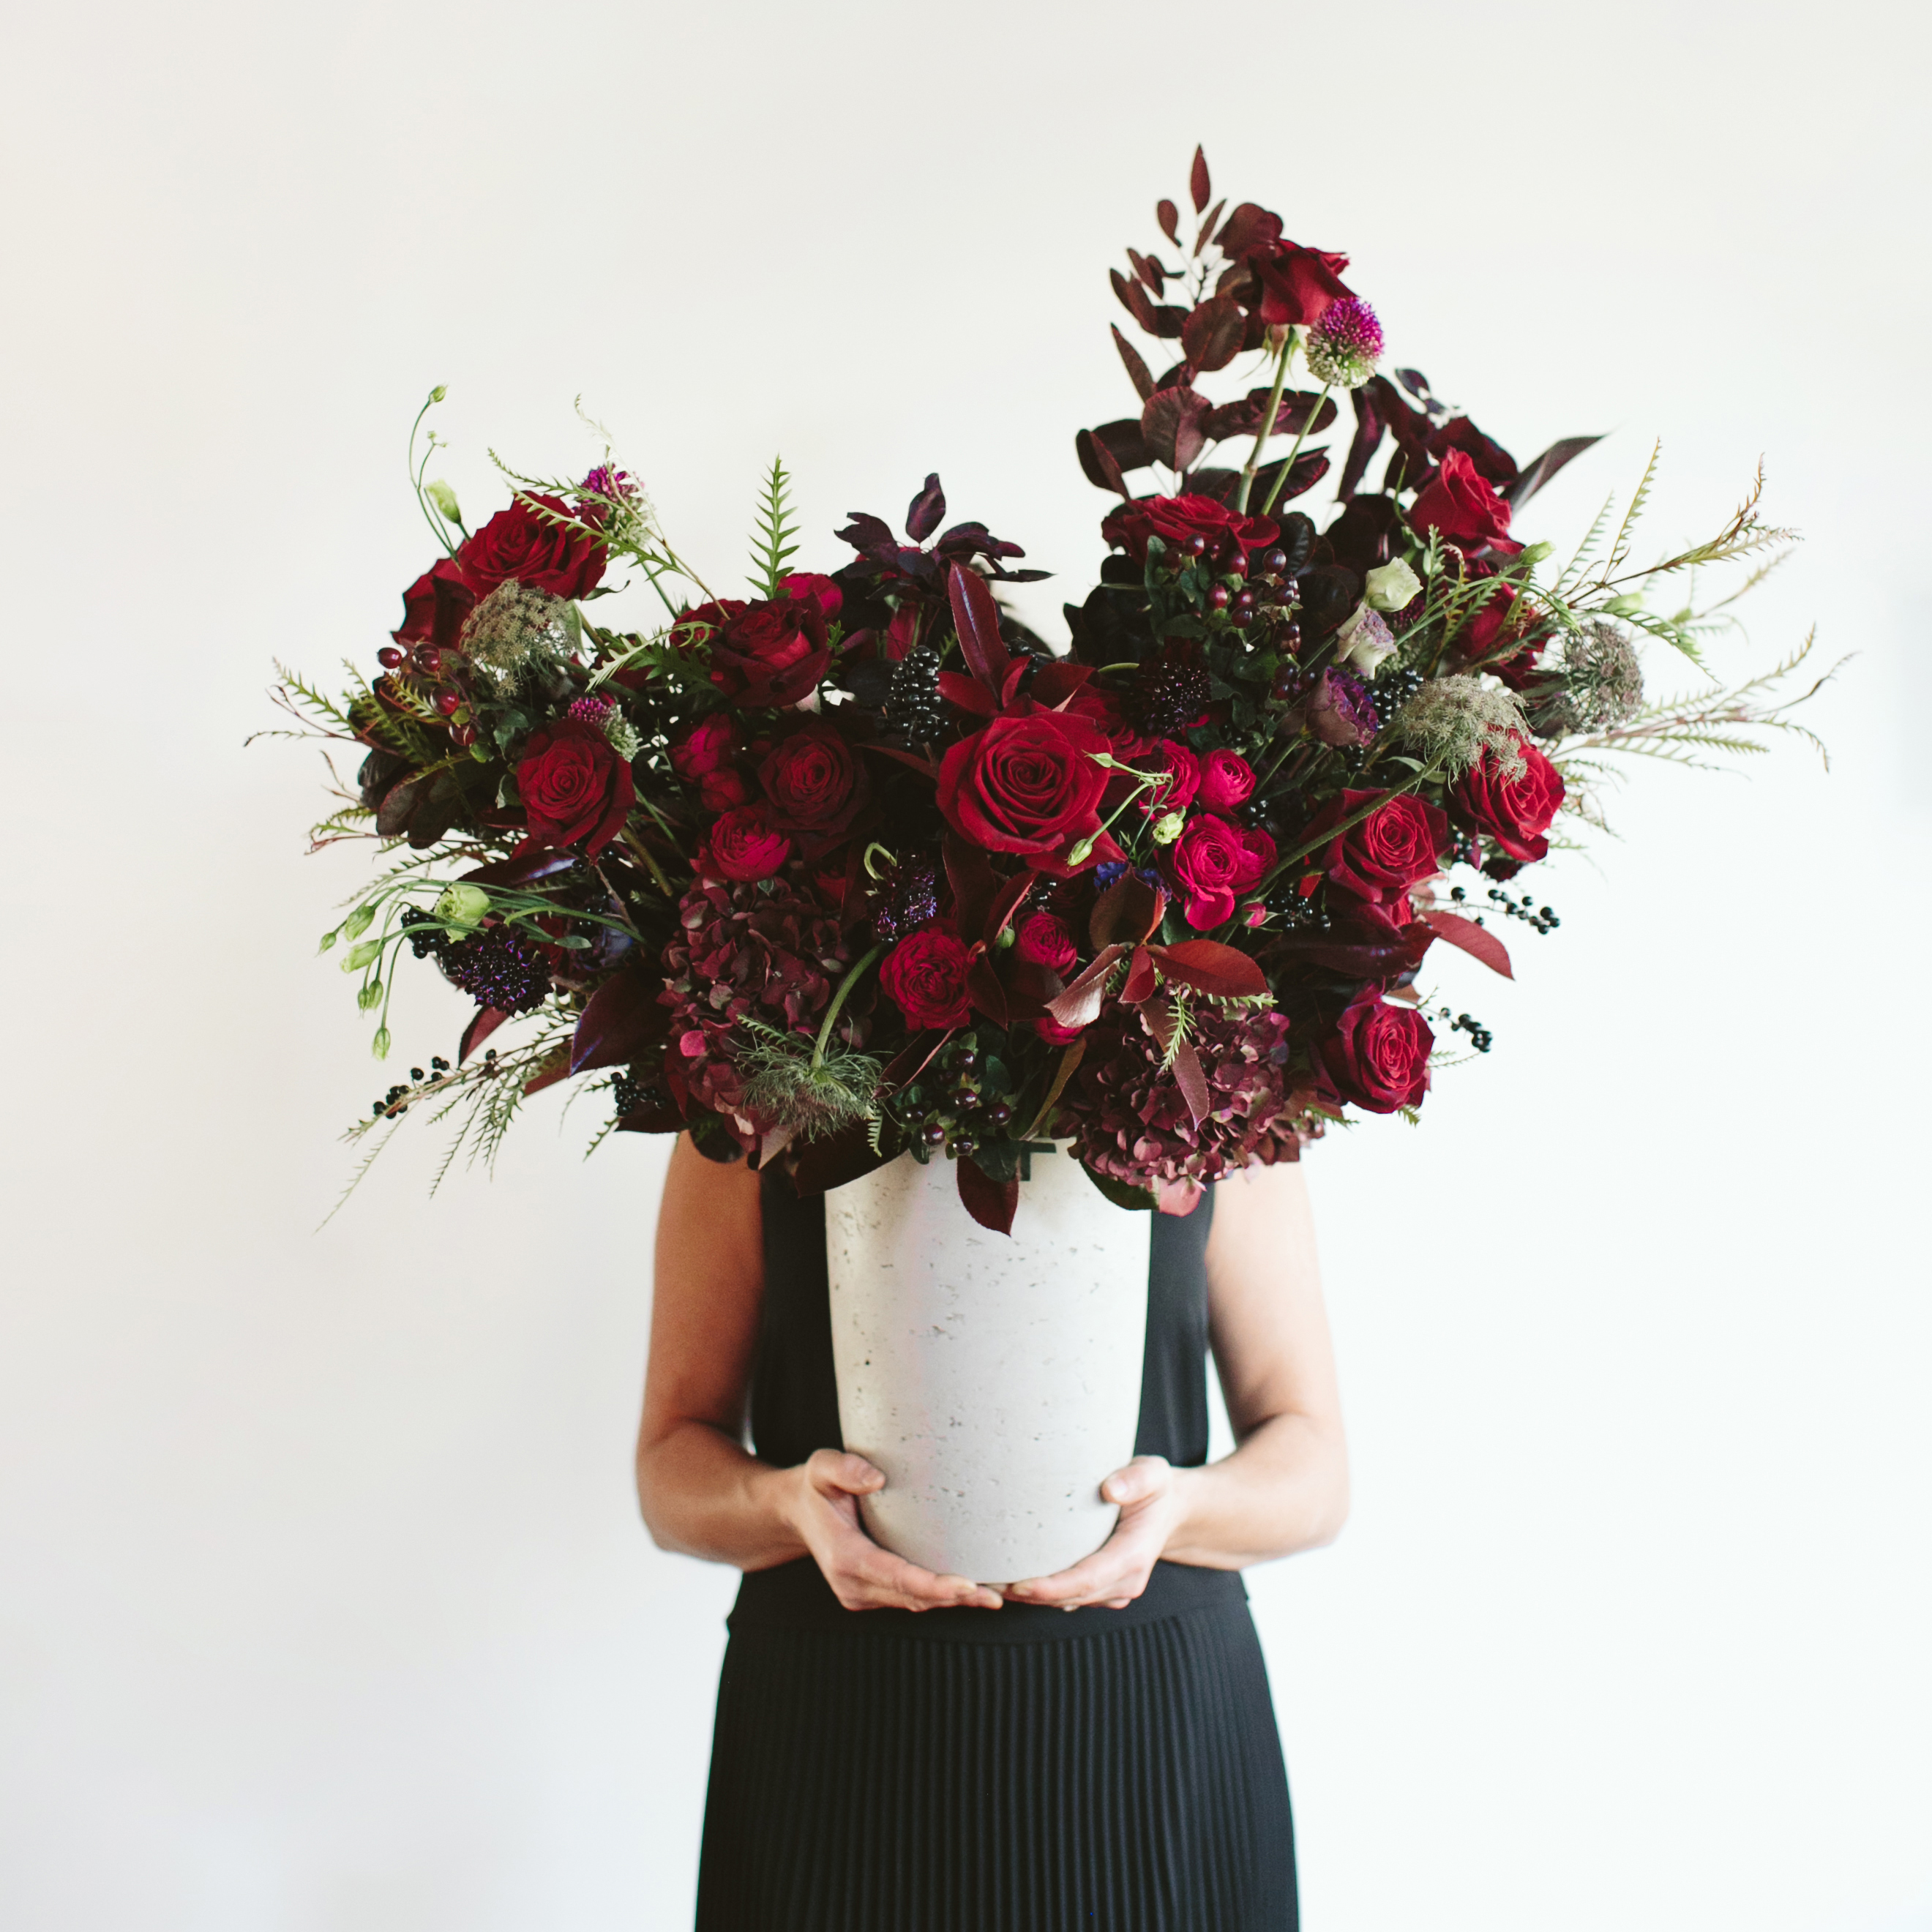 Luxe Holiday Floral Inspiration | Moody Winter Flower Arrangement with Black Magic Roses, Black Baccara Roses Gem and Lace Spray Garden Roses, Liqustrom, Hypericum, Allium, Lisianthus, Scabiosa, Chocolate Lace, Cotinus, Photina and Grevillea by Rebecca Dawn Design // JustineCelina.com